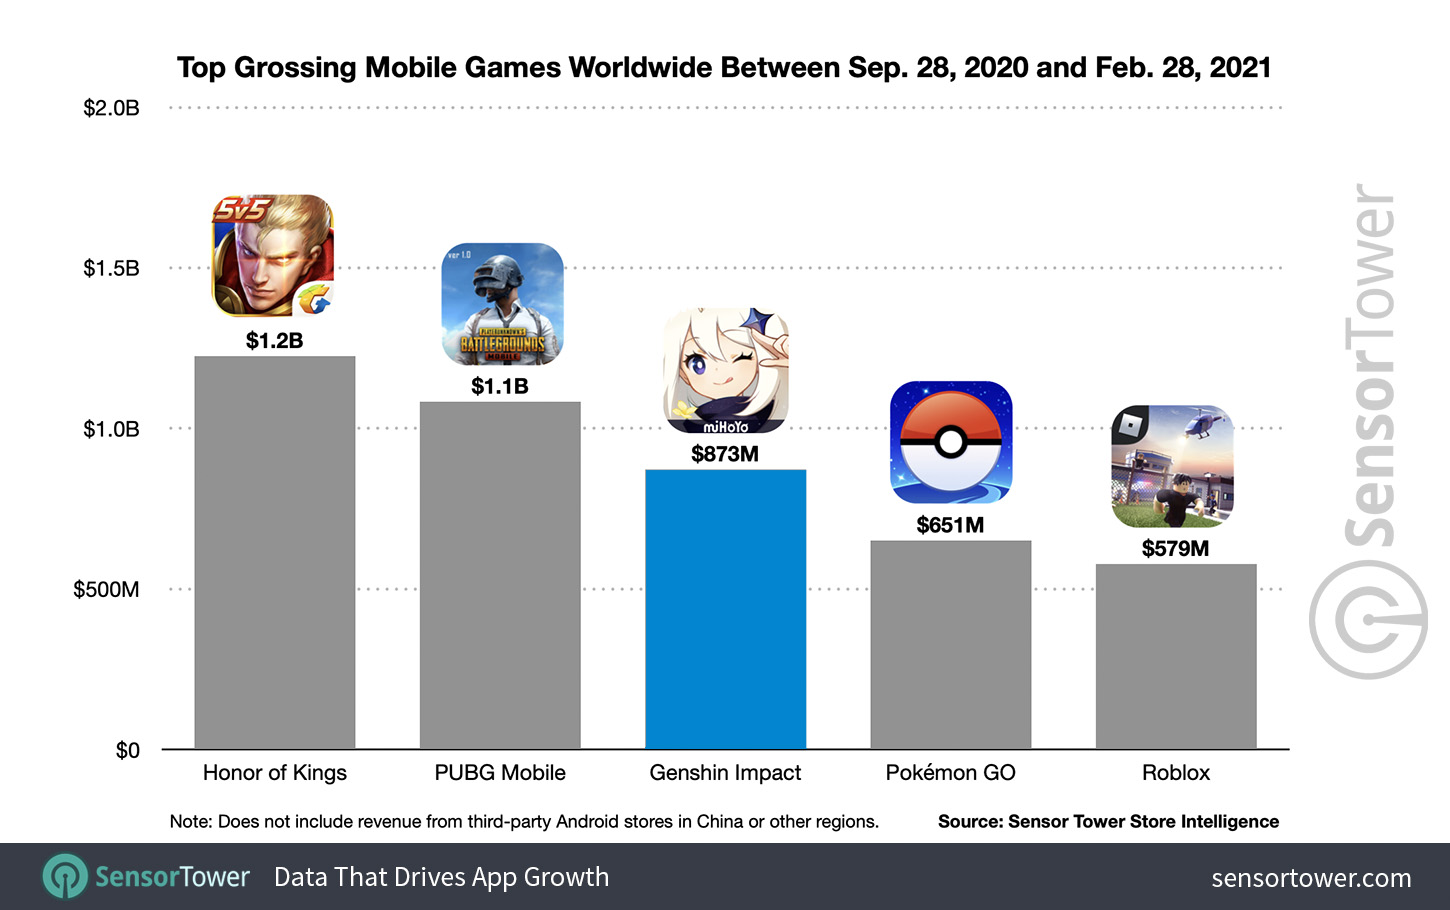 Top Grossing Mobile Games Worldwide Between September 28, 2020 and February 28, 2021